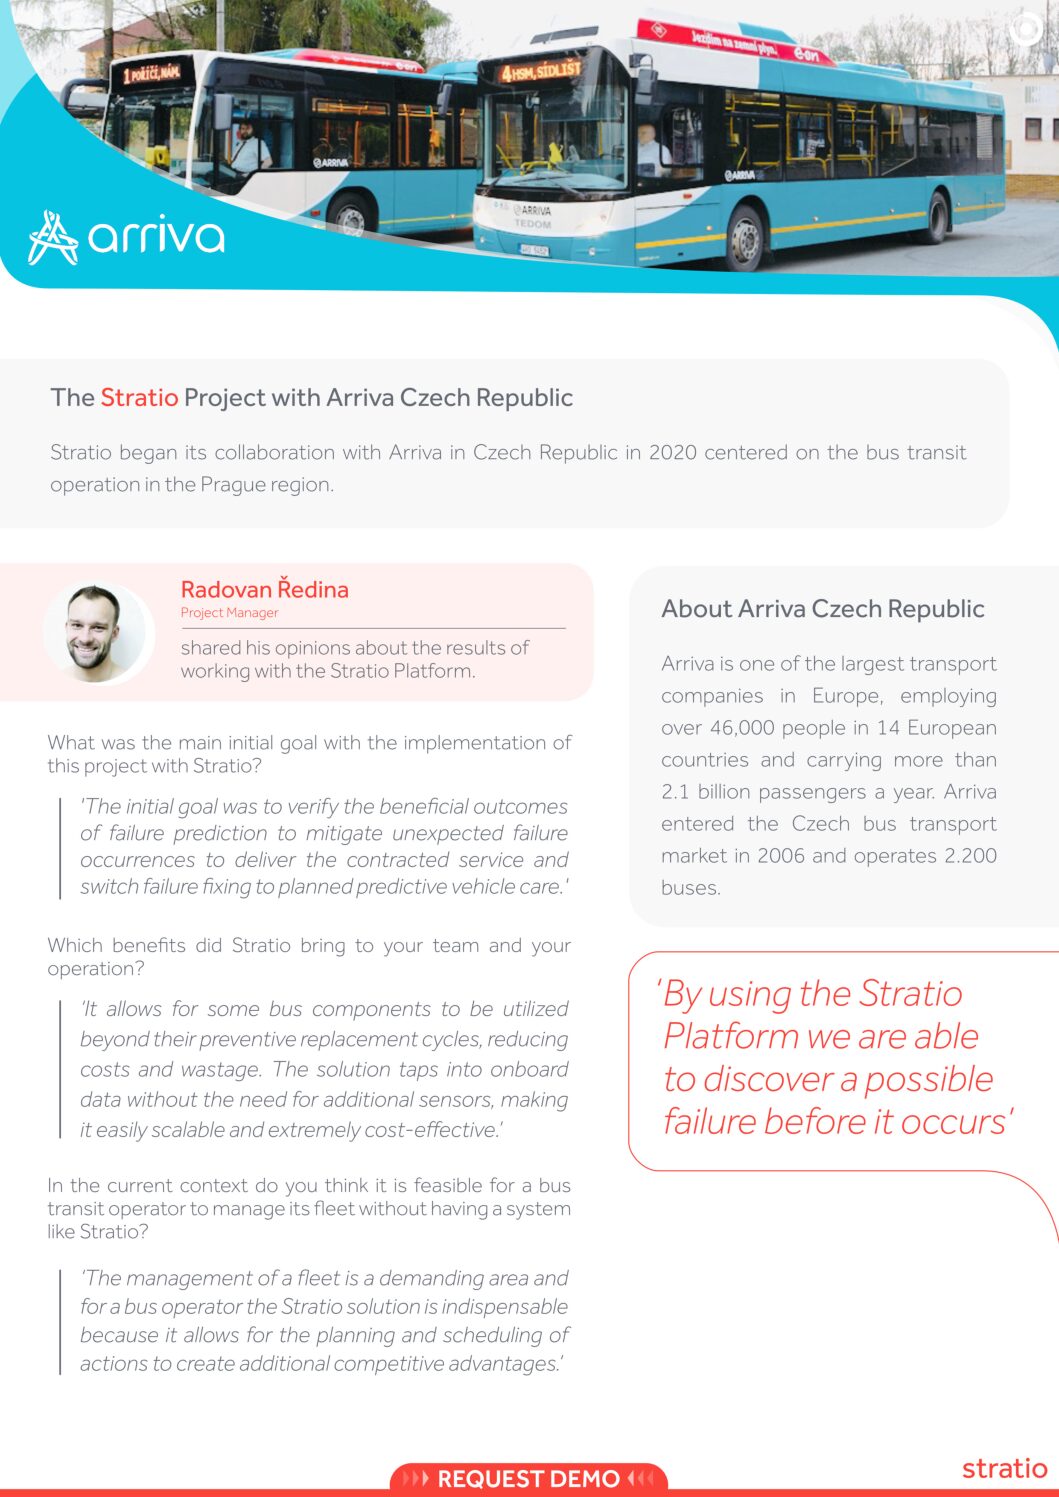 The Stratio Project with Arriva Czech Republic